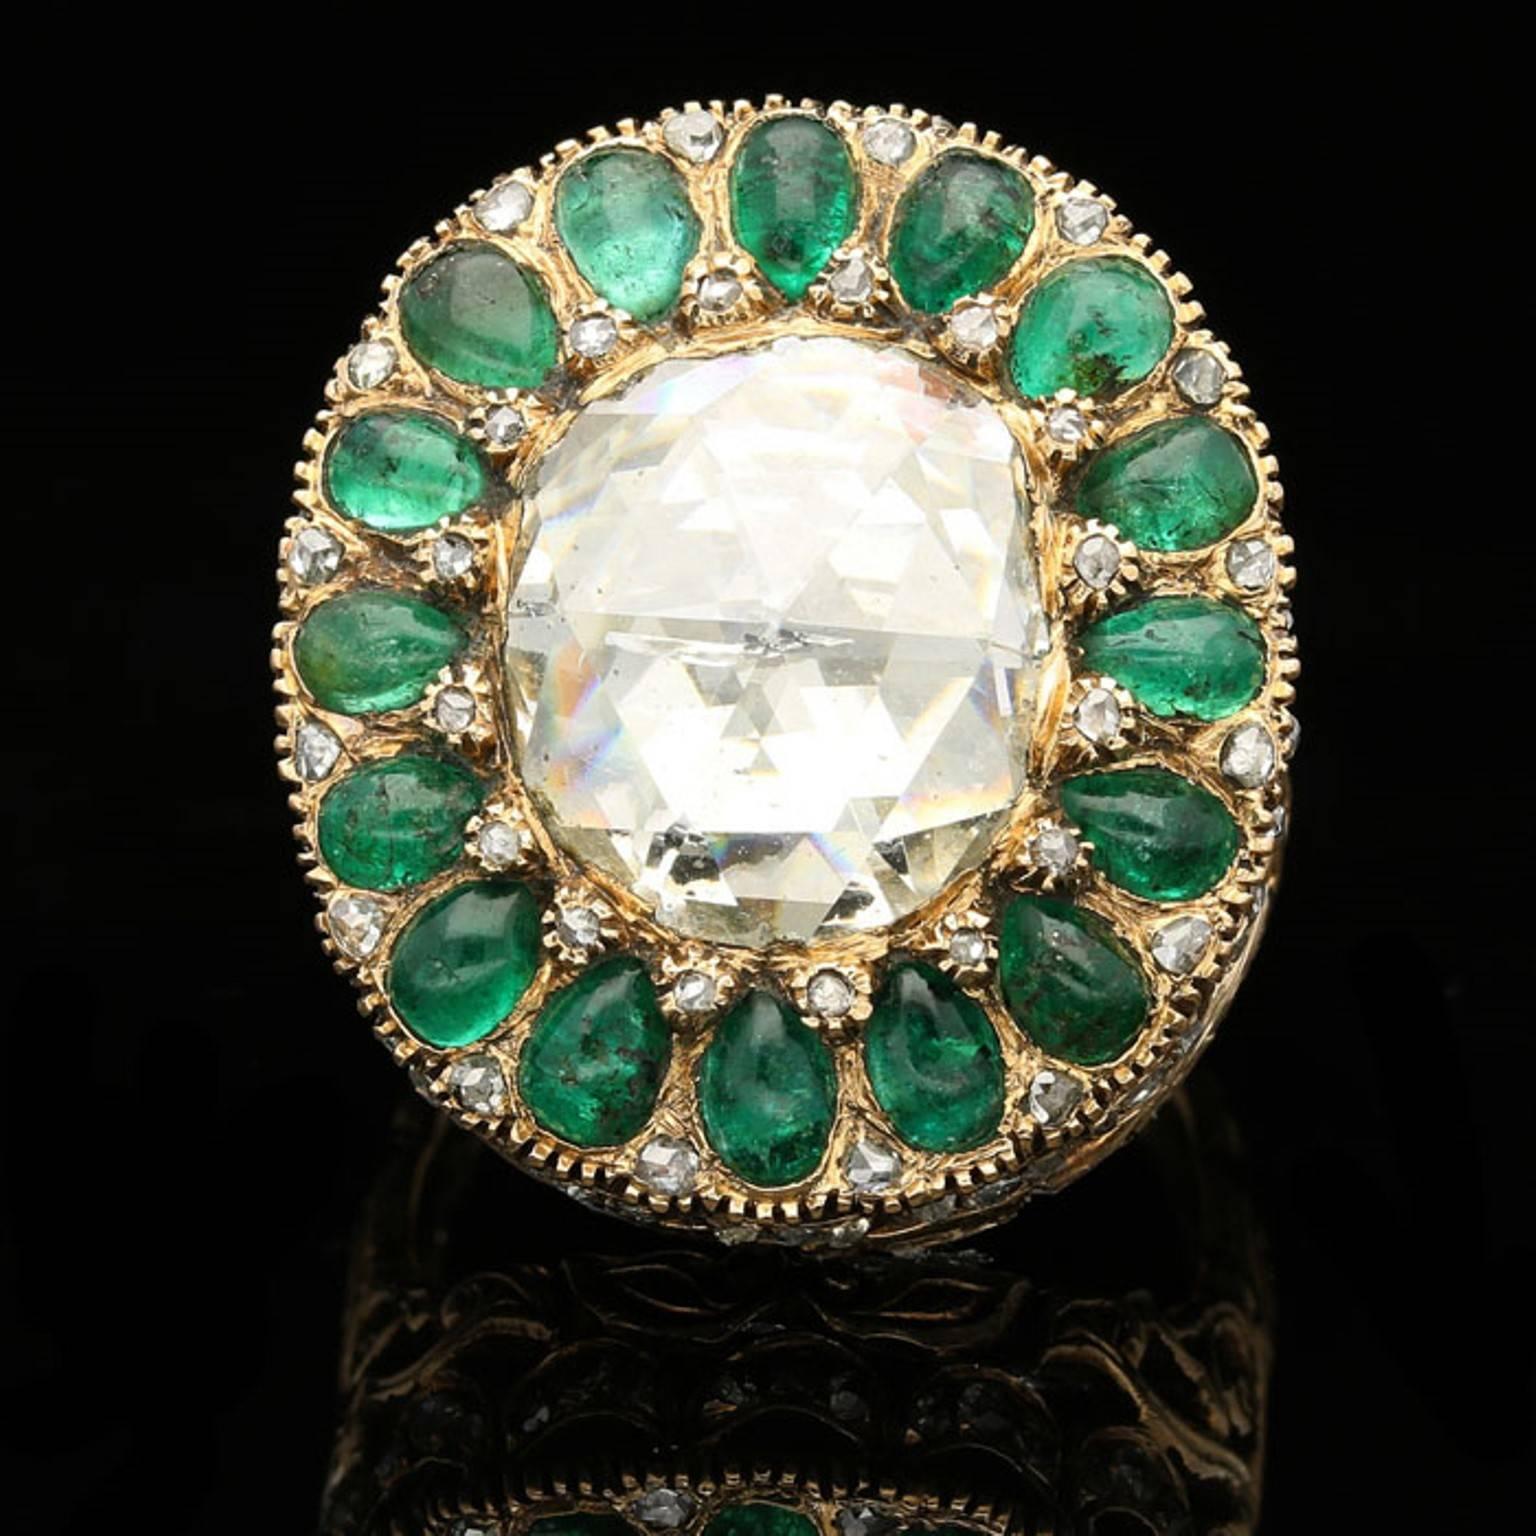 The ring centred on a large cushion shaped rose-cut diamond surrounded by sixteen pear shaped emerald cabochons in a cluster design embellished with two tiny rose-cut diamonds between each, all in a domed closed back setting, to a highly ornate